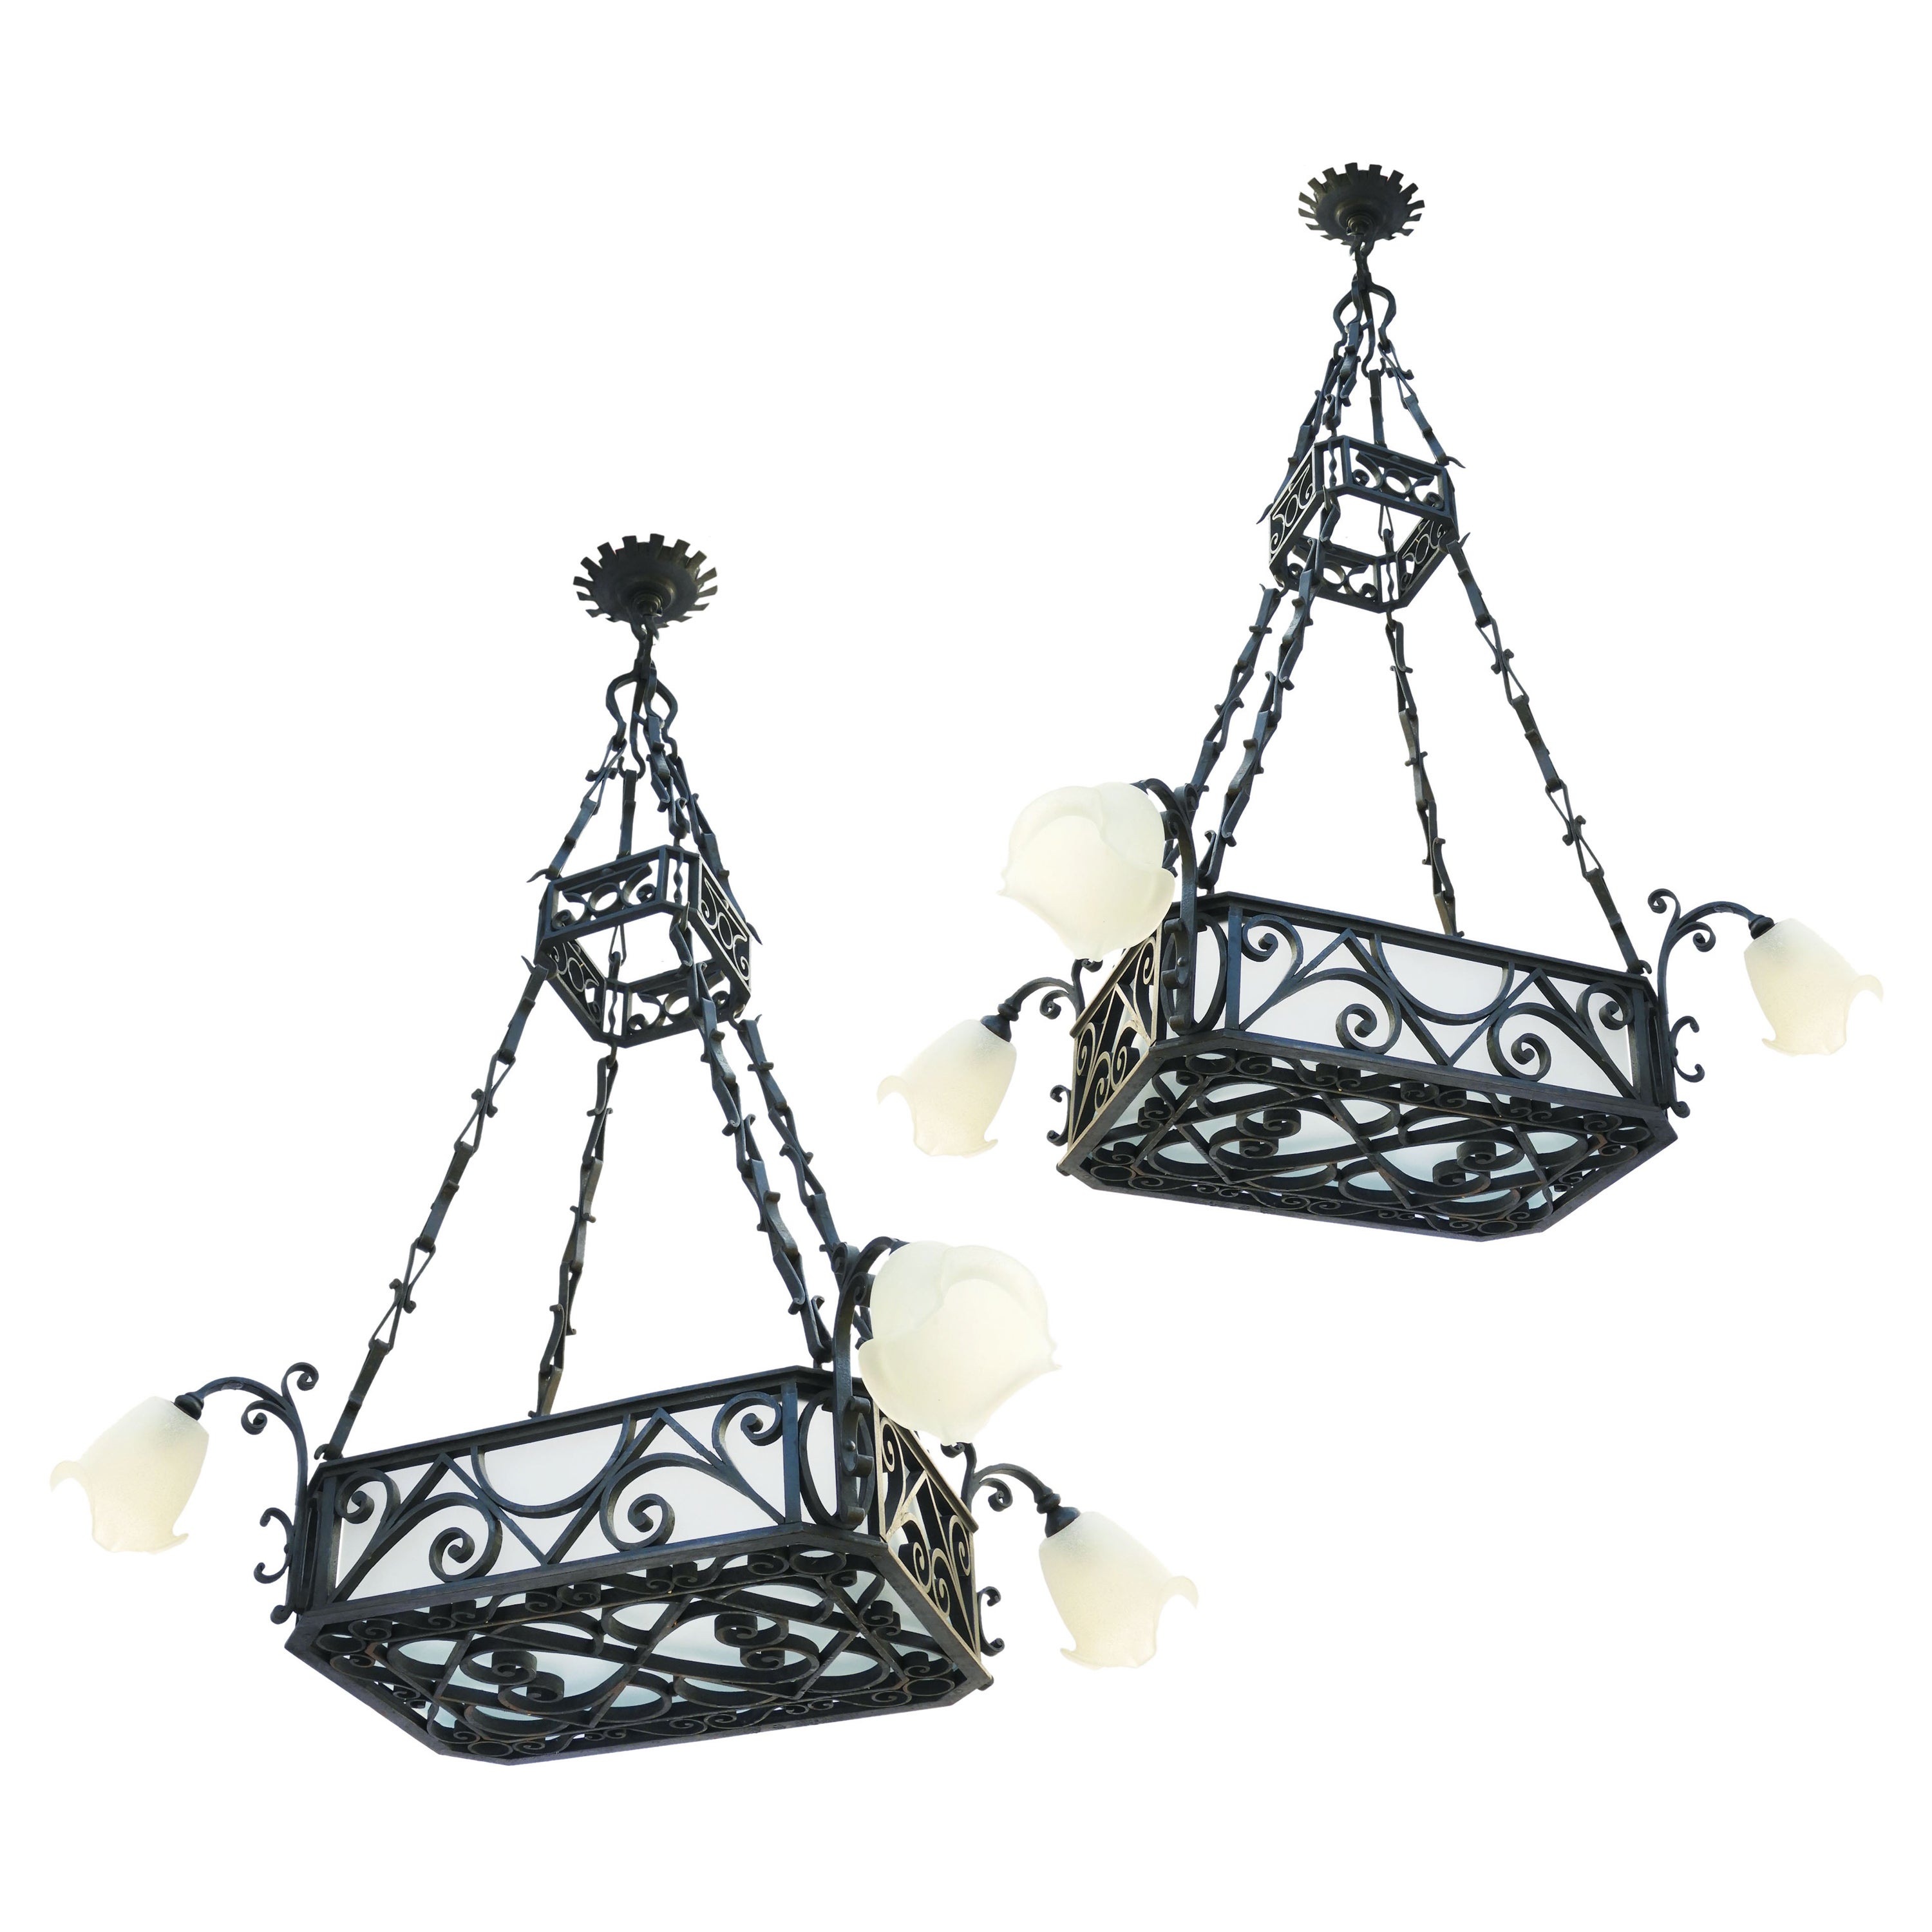 Pair of Antique Wrought Iron 8-Light Chandeliers C1900 French Belle Époque For Sale